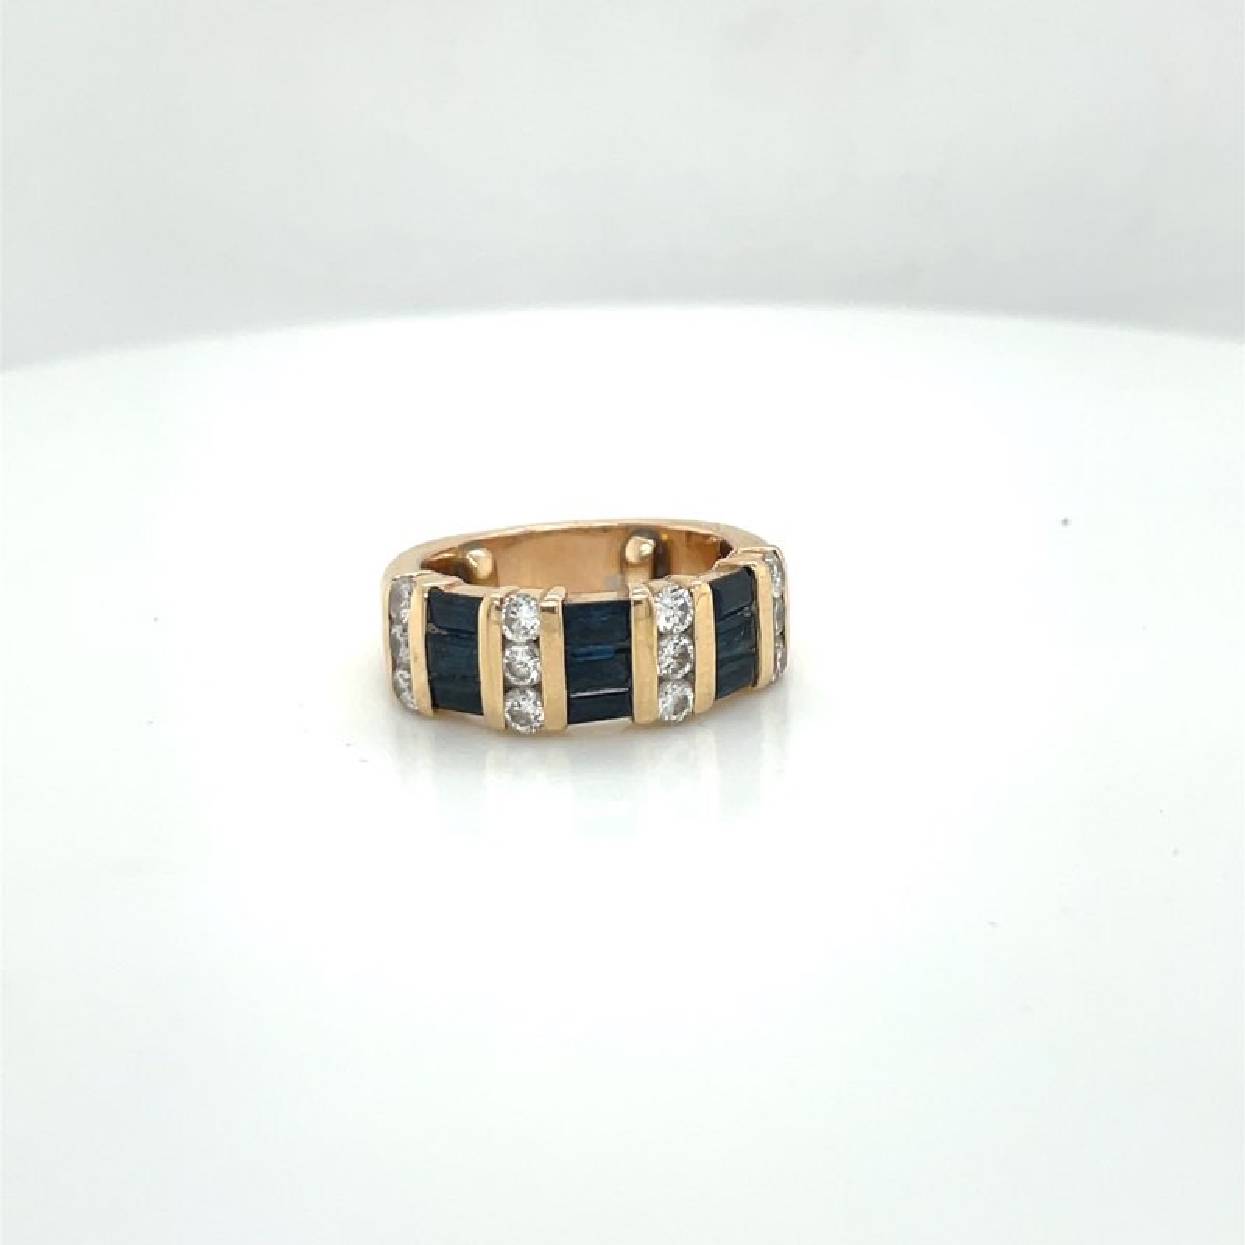 14K Yellow Gold Band with Sapphires and Channel Set Diamonds
Size: 3.5